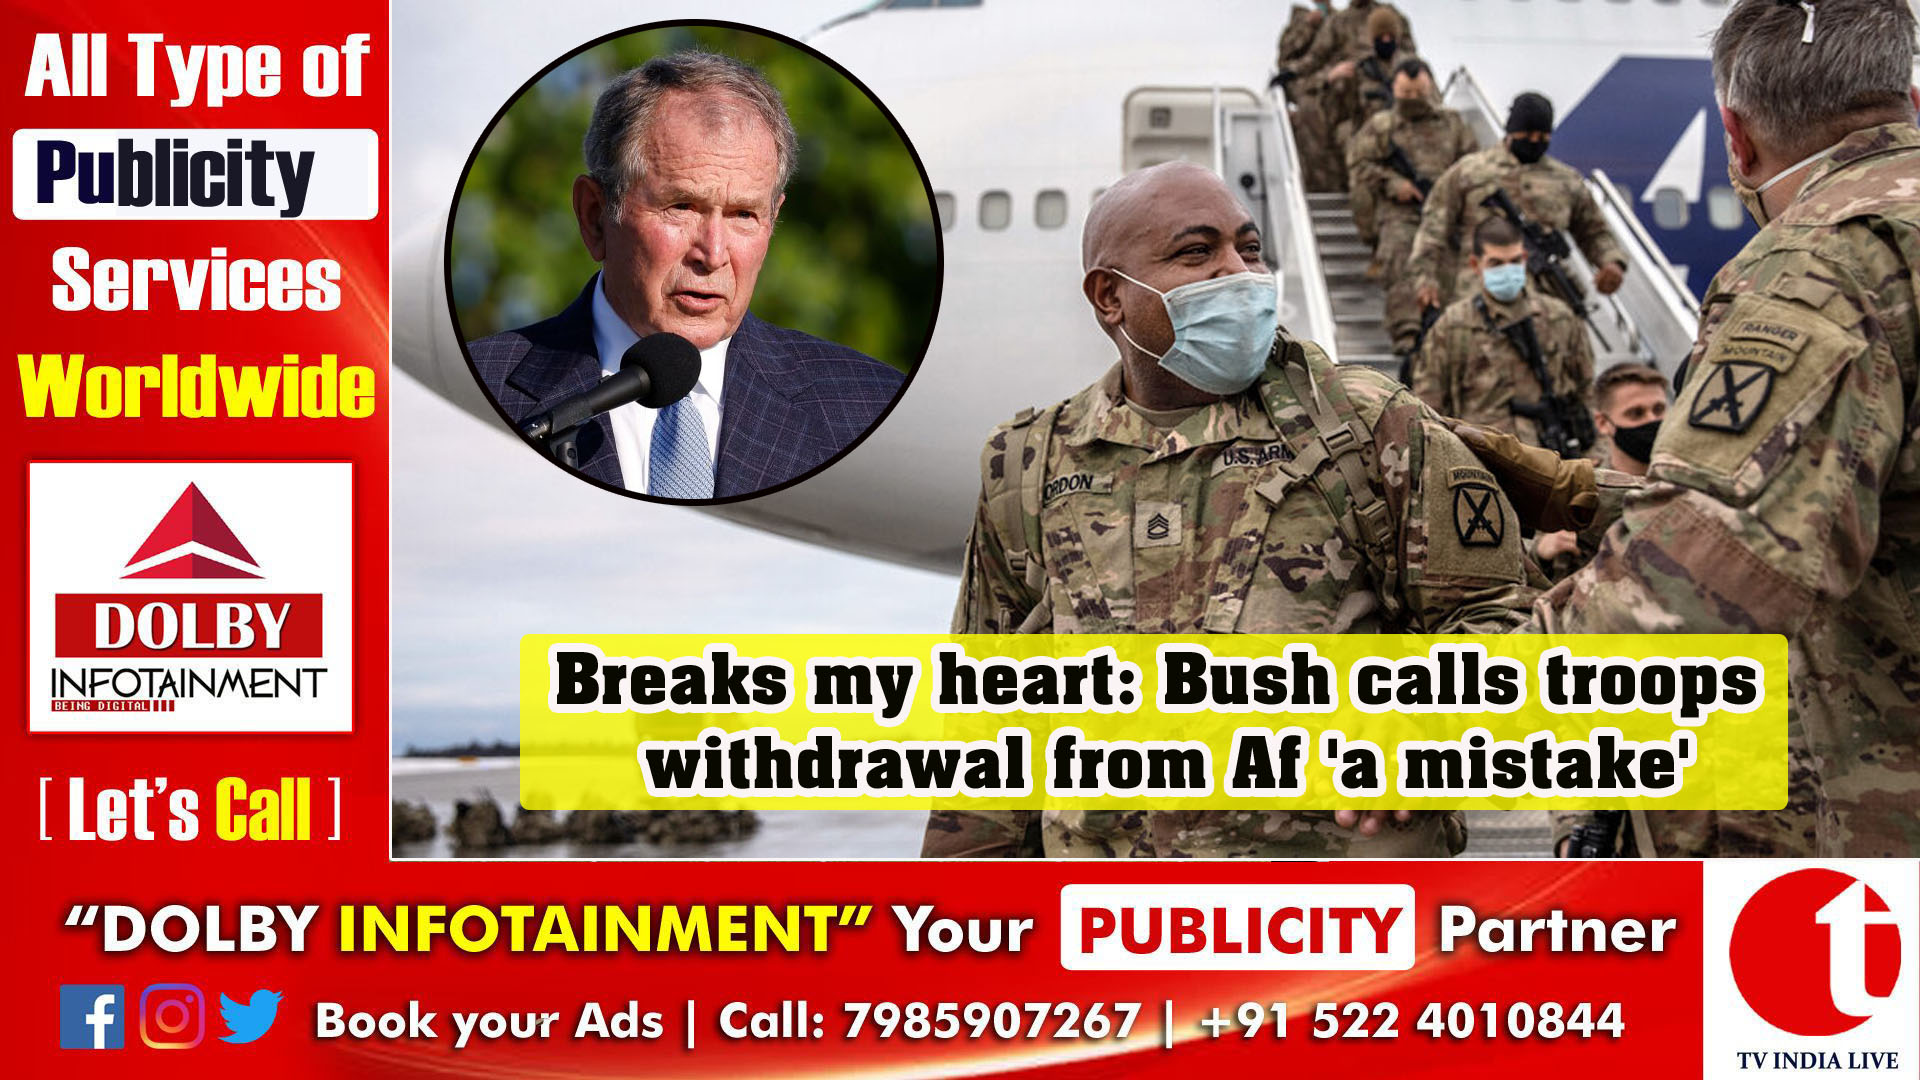 Breaks my heart: Bush calls troops withdrawal from Af 'a mistake'